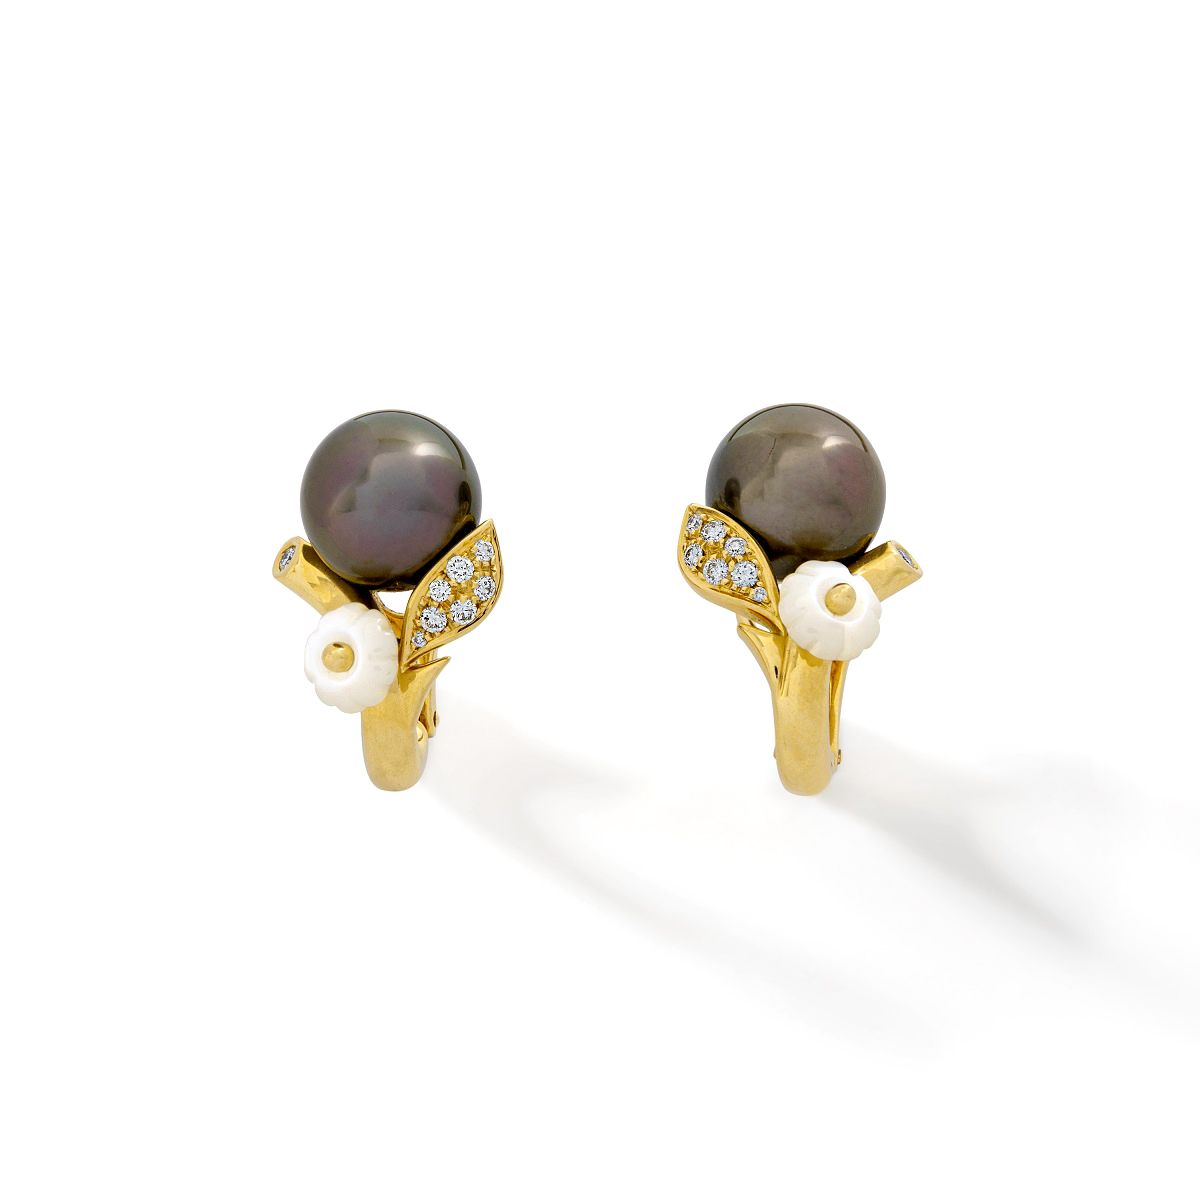 Null Earrings in 18 ct yellow gold with a black cultured pearl, a leaf in diamon&hellip;